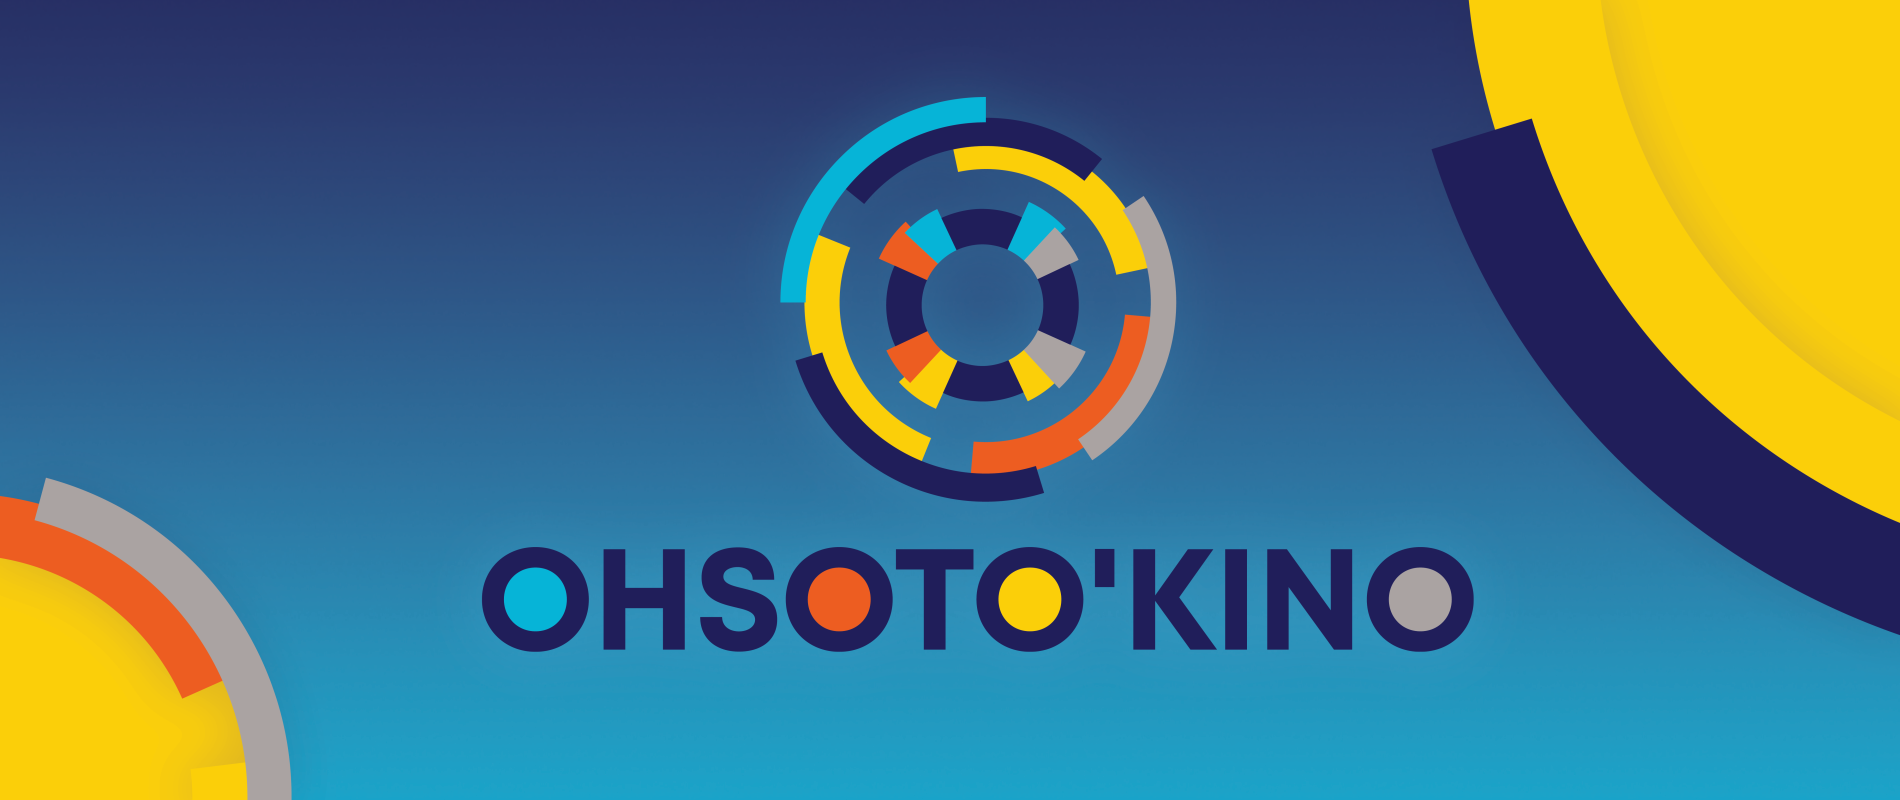 National Music Centre Announces OHSOTO’KINO, A New Indigenous Programming Initiative Sponsored By TD